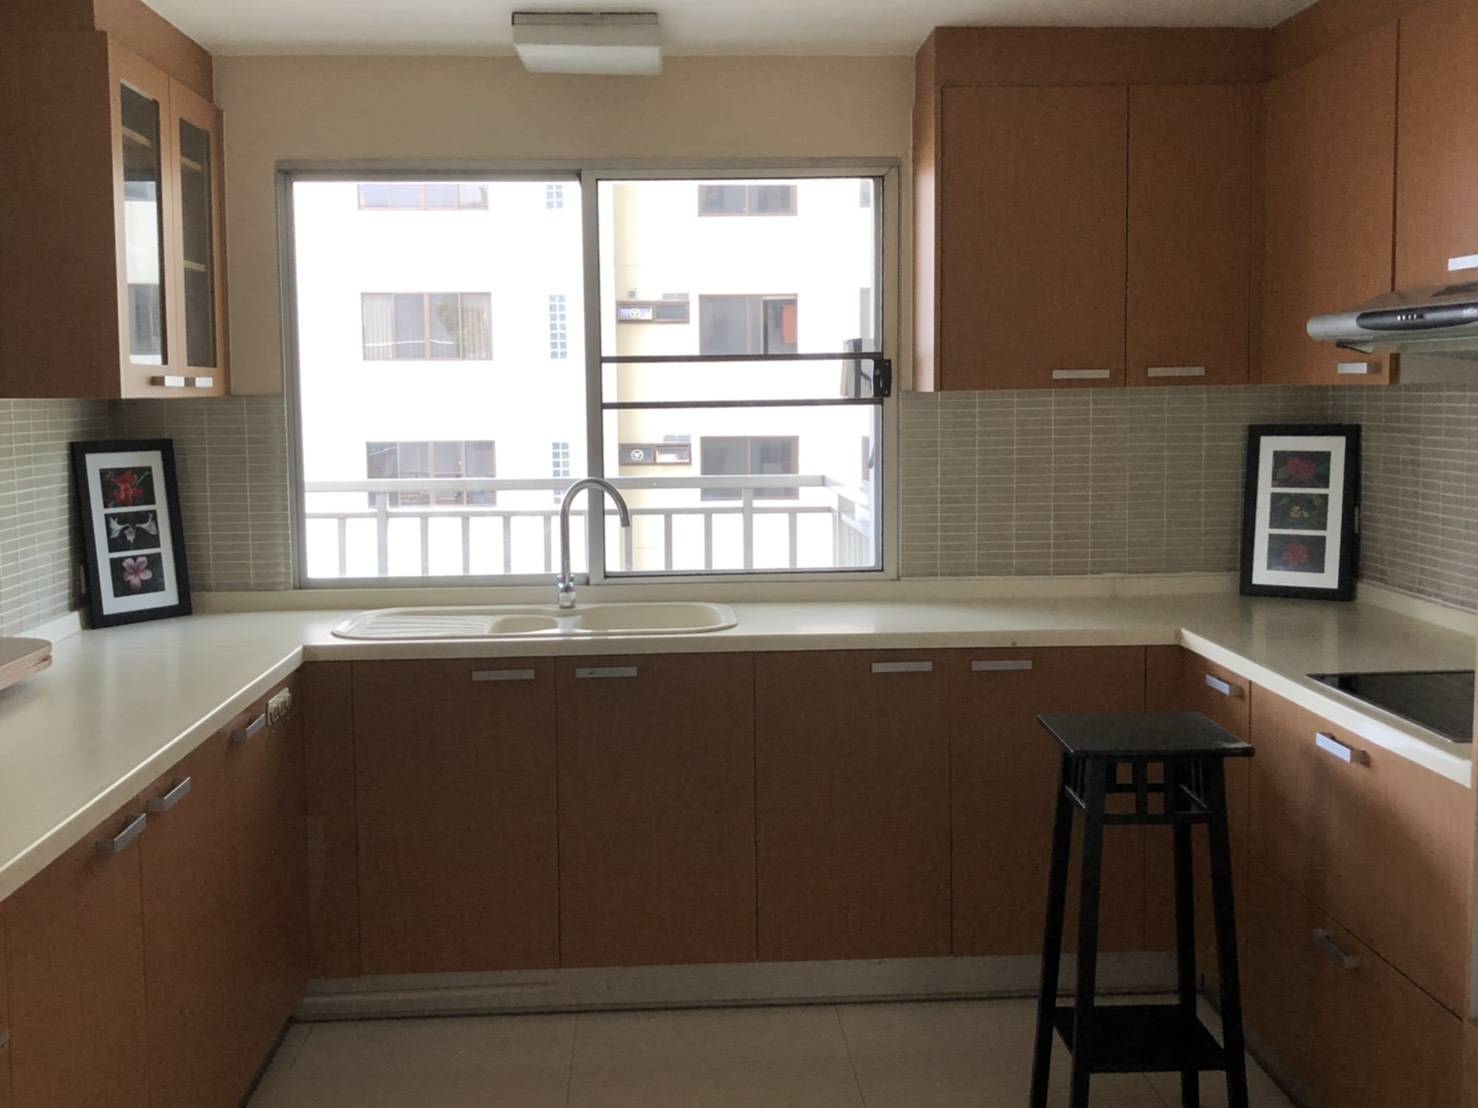 Bangkok Condo Apartment For Rent in Sathorn near Lumpini Park Large Unit with Maid's Room